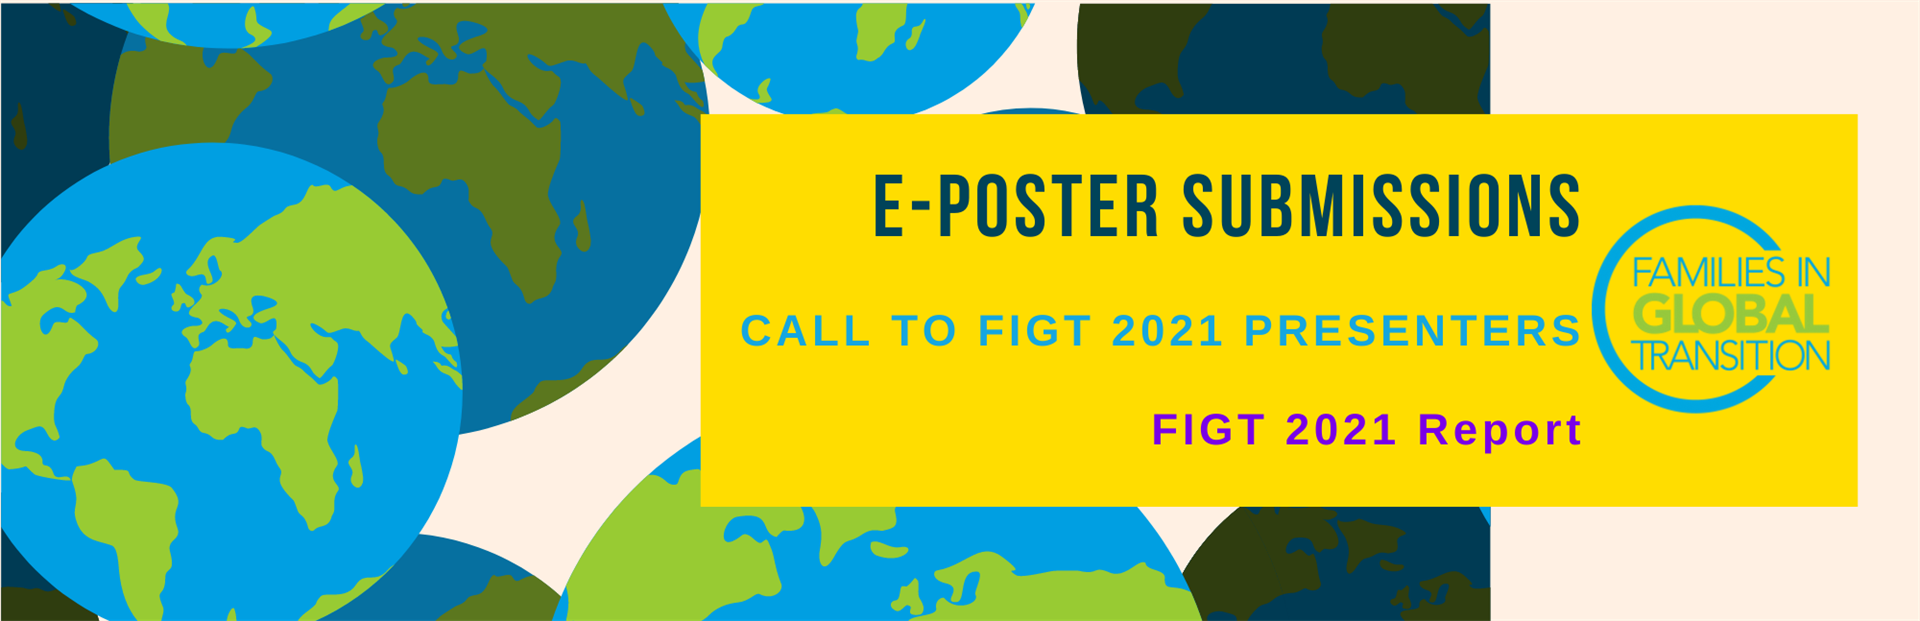 call for e-poster submissions from FIGT2021 presenters